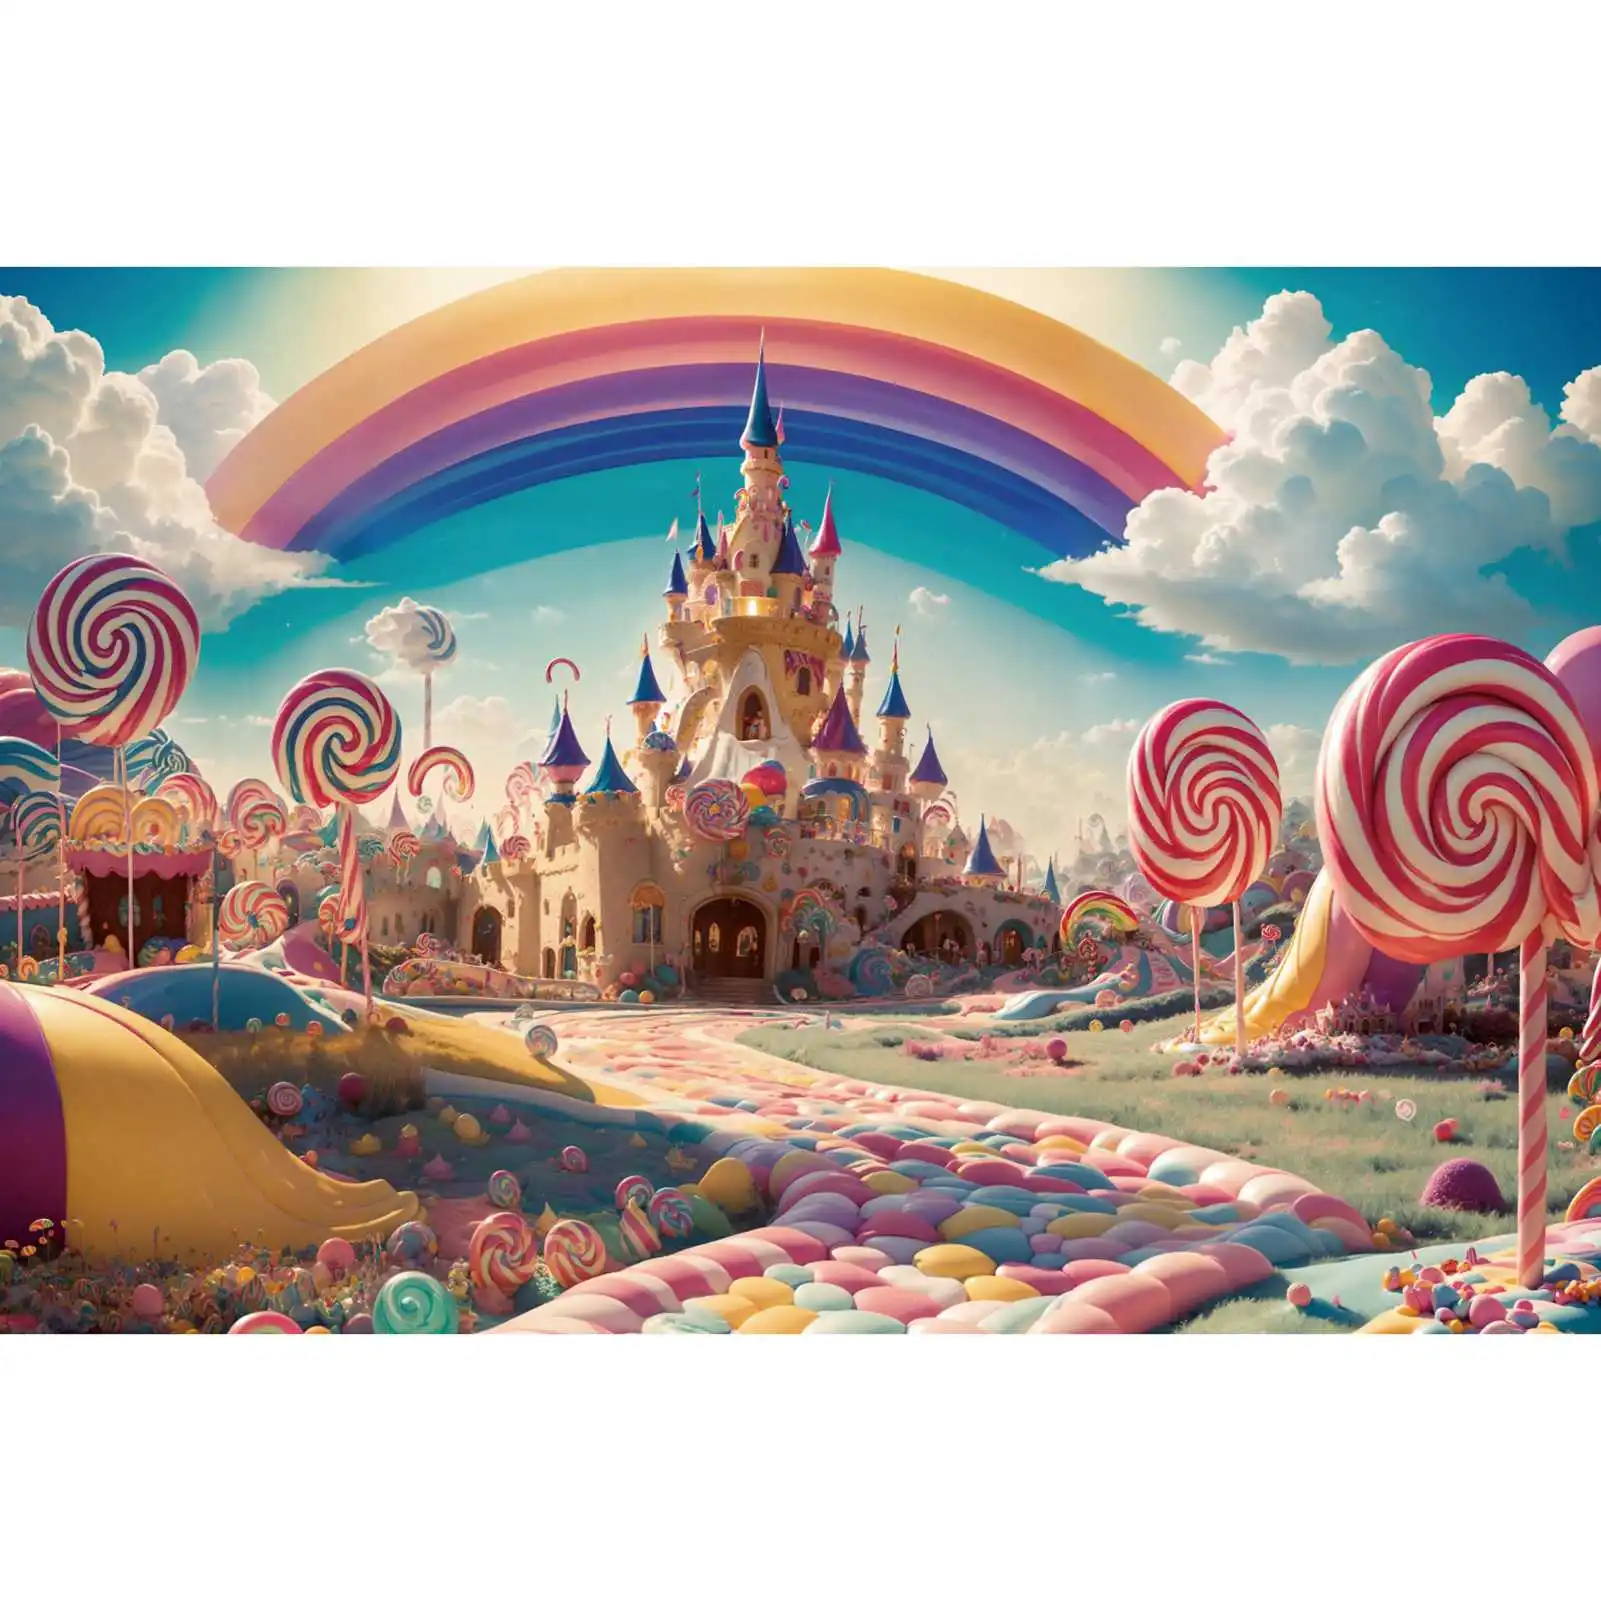 

Candyland Birthday Party Photography Backdrops Decorations Castle Rainbow Pathway Lollipop Cream Custom Baby Photo Backgrounds